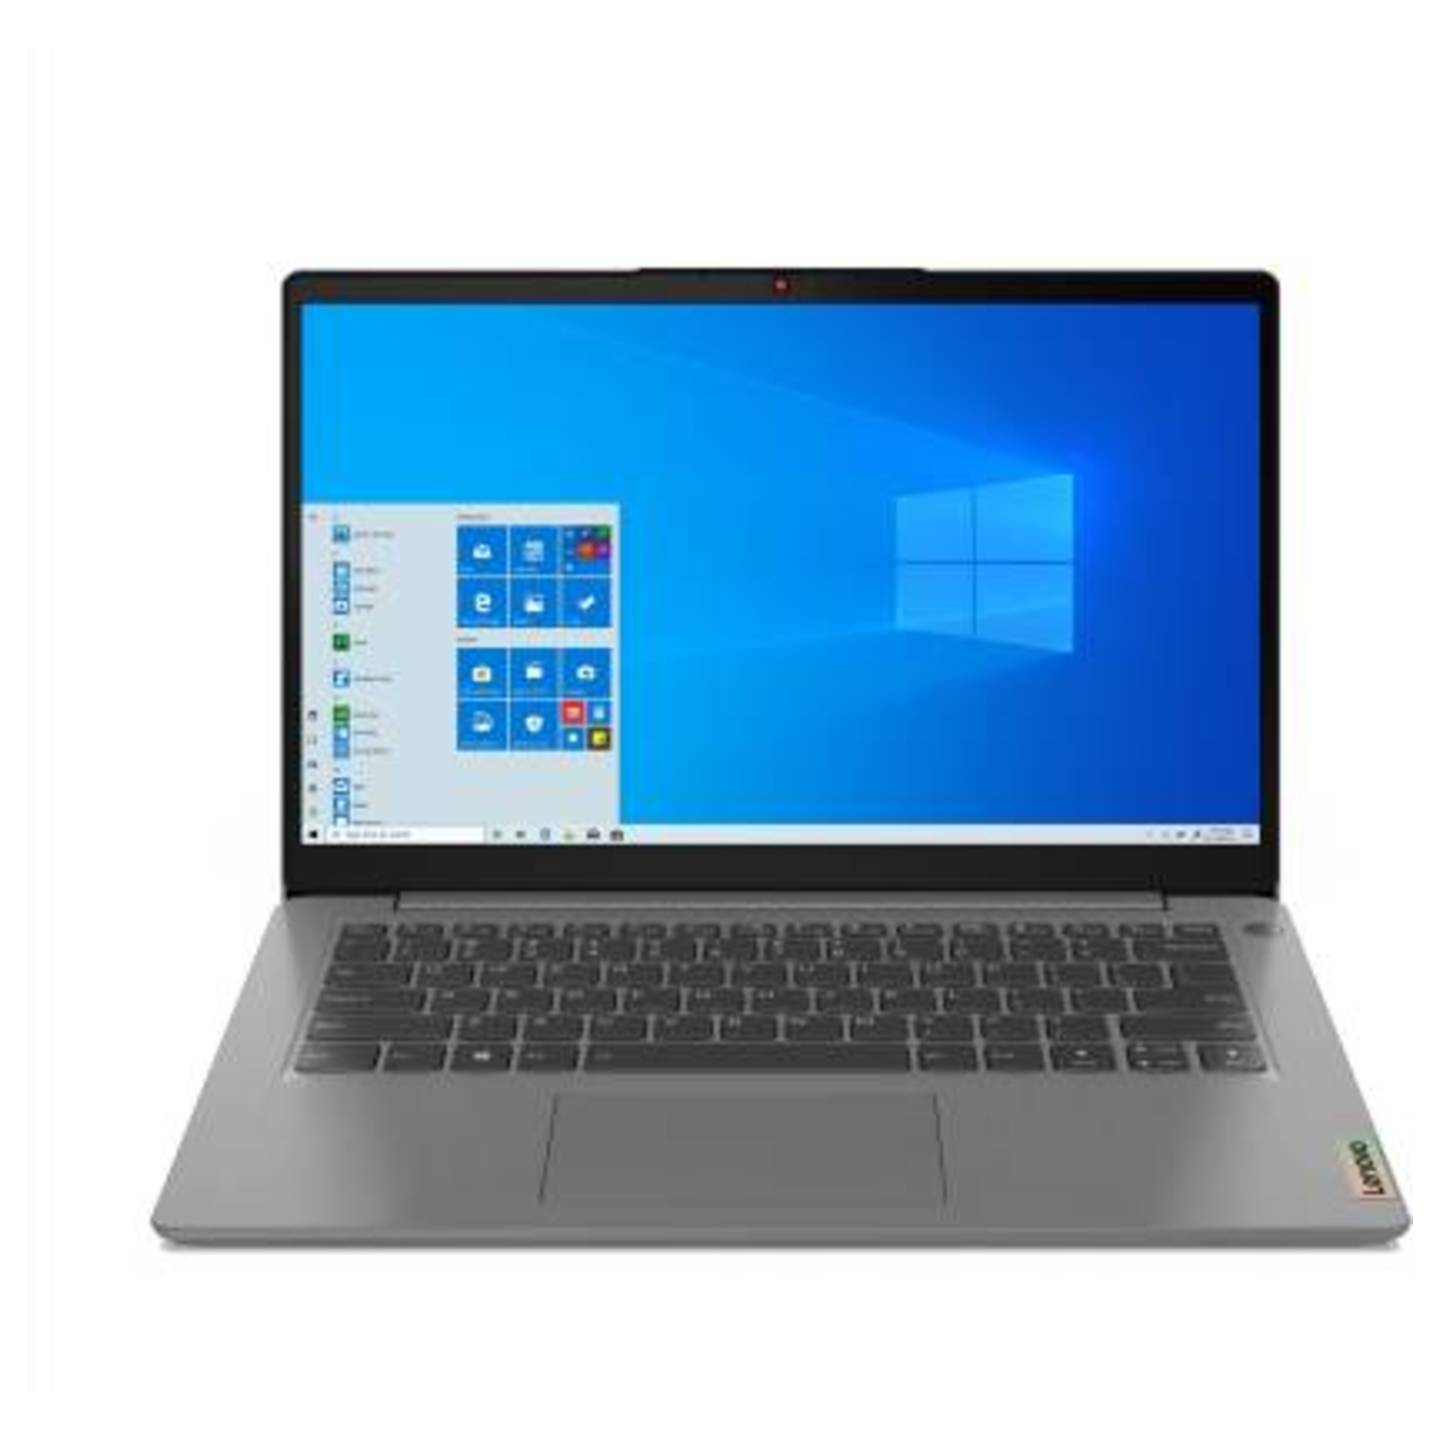 Lenovo IdeaPad Slim 3 Core i3 11th Gen - (8 GB/512 GB SSD/Windows 10 Home) 14ITL6 Thin and Light Laptop  (14 inch, Arctic Grey, 1.41 kg, With MS Office)